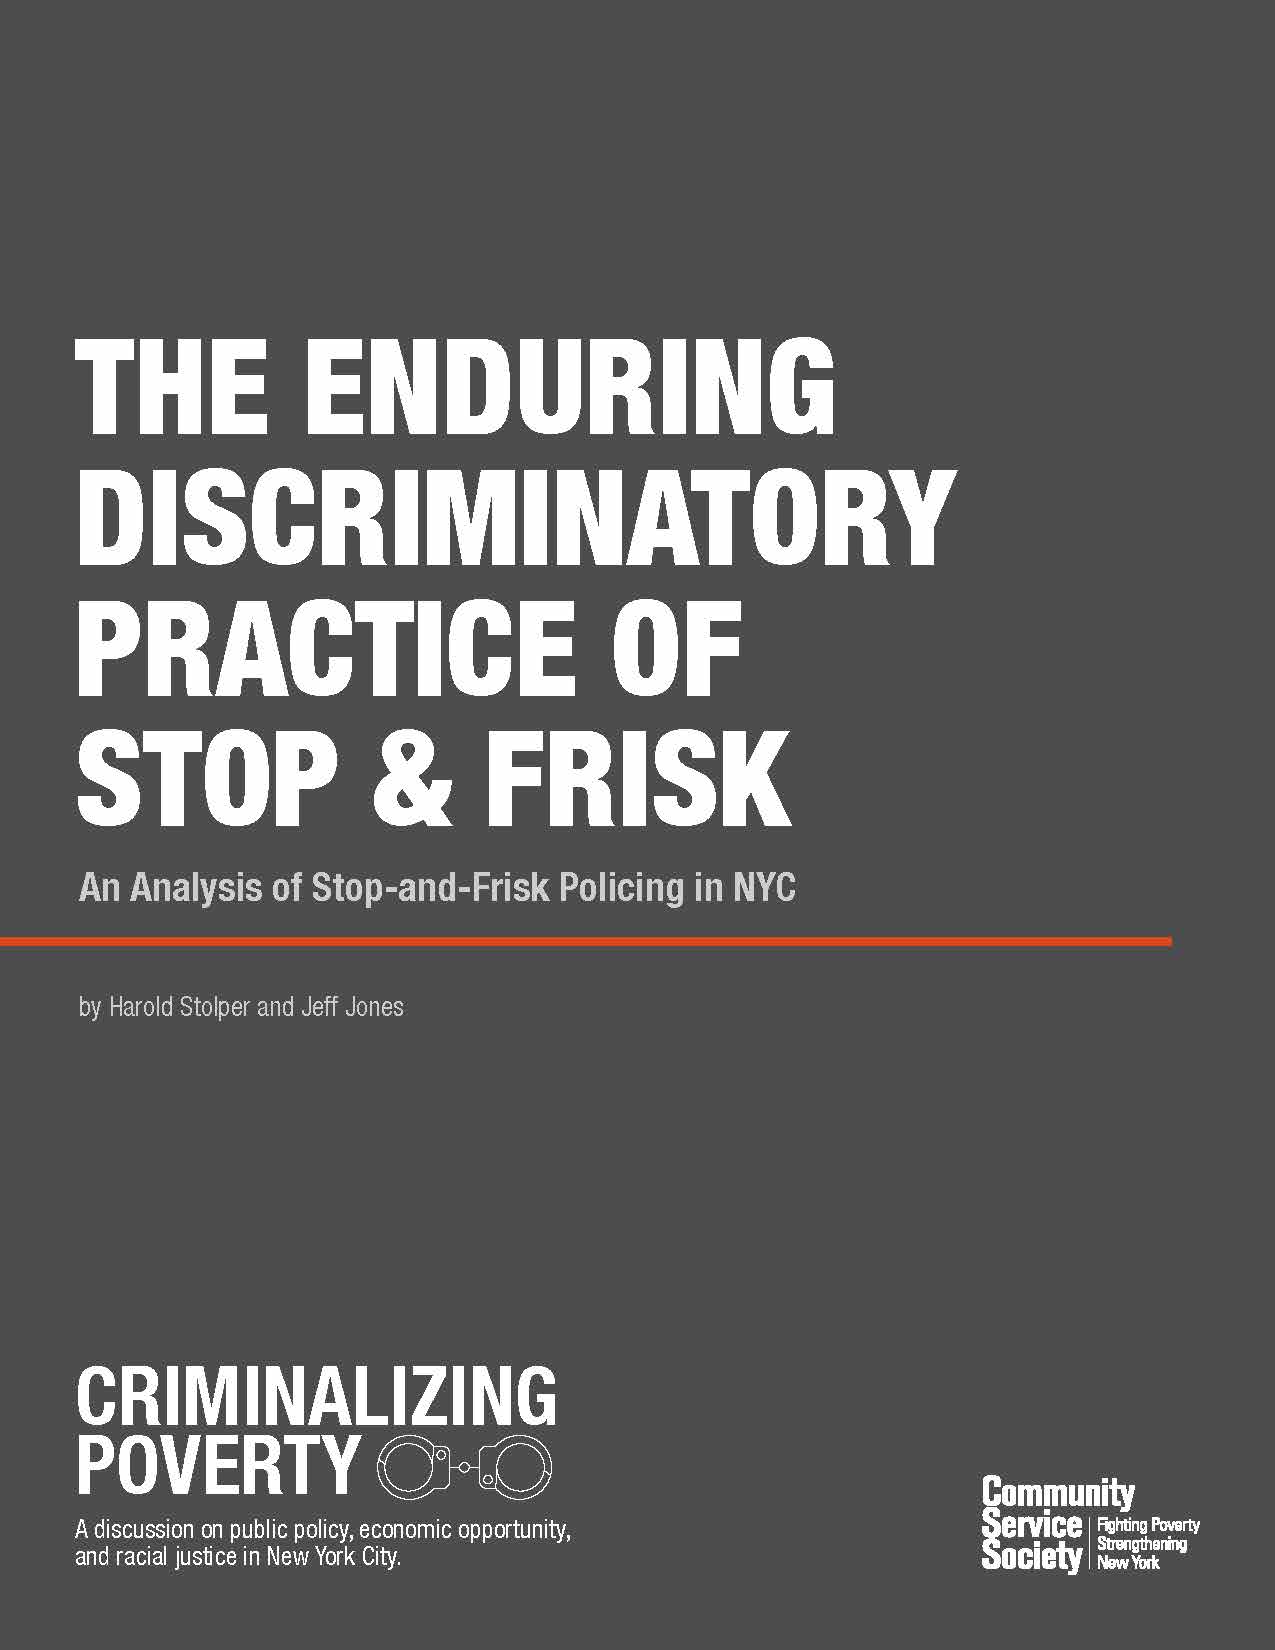 The Enduring Discriminatory Practice of Stop and Frisk